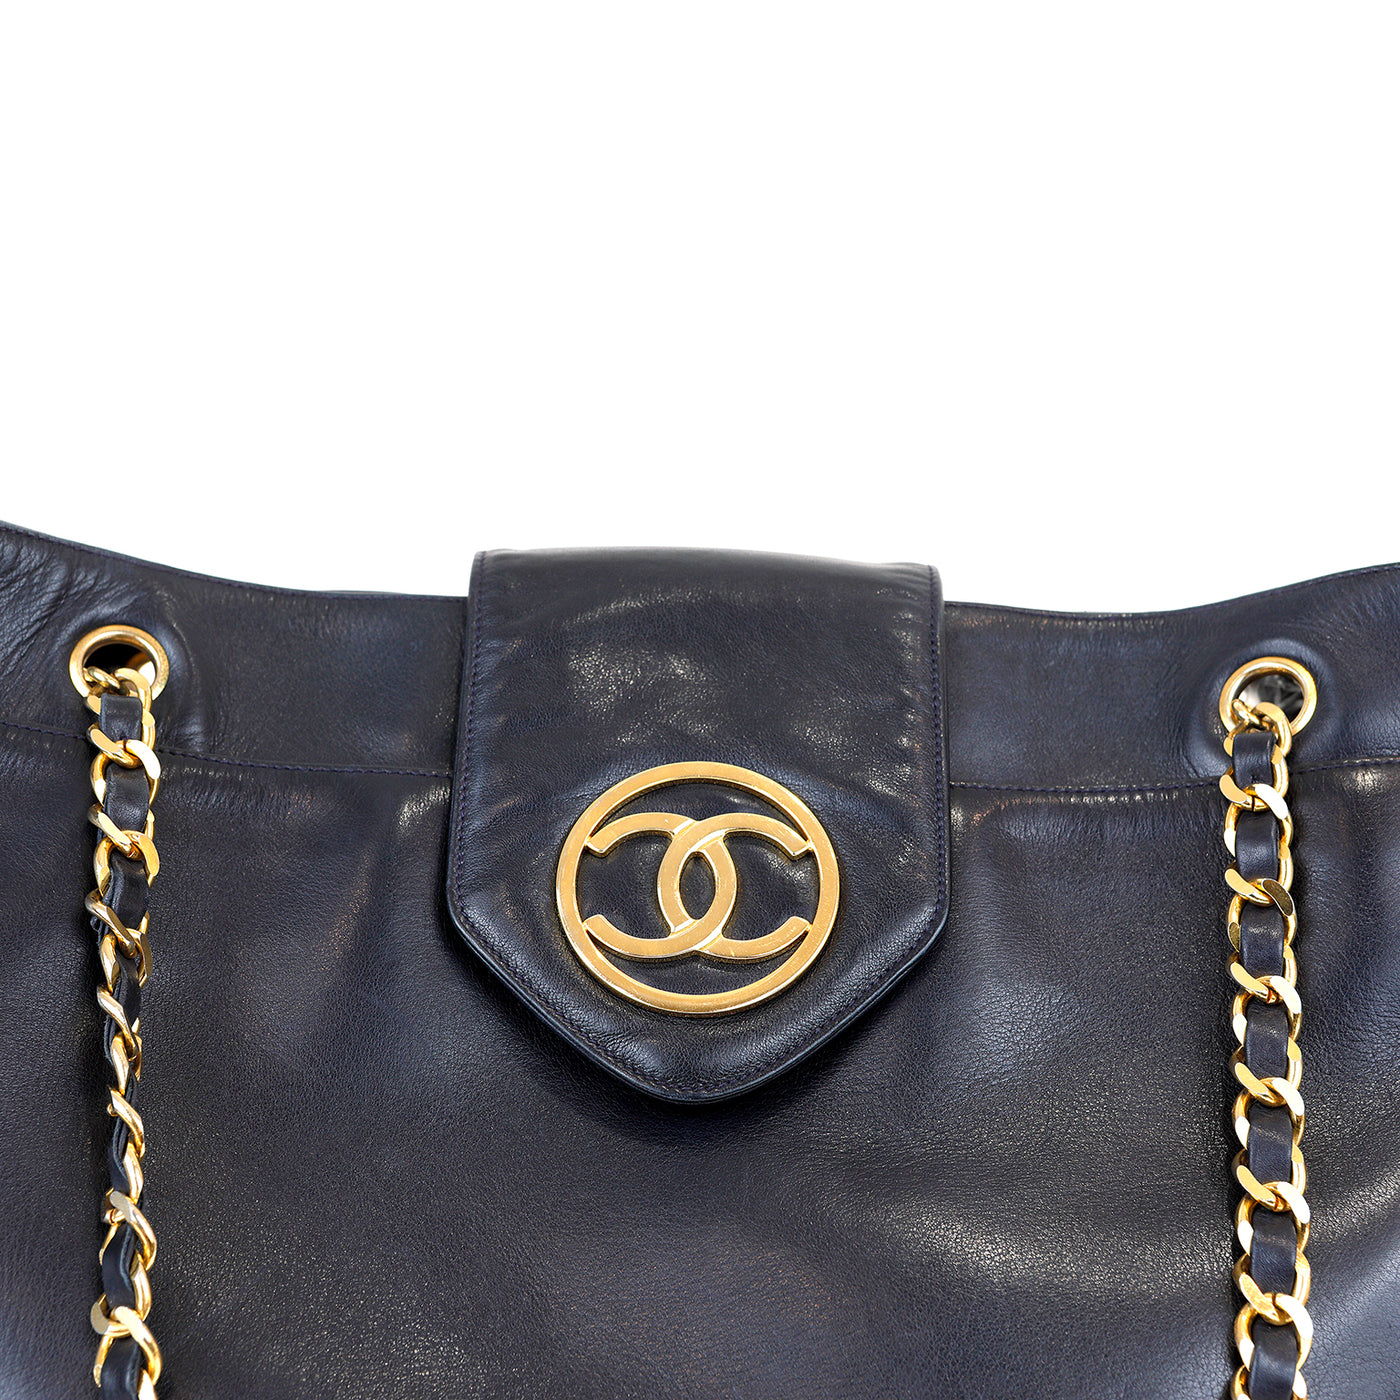 Chanel Navy Blue Large Tote Lambskin/Quilted Bottom w/ Gold Hardware